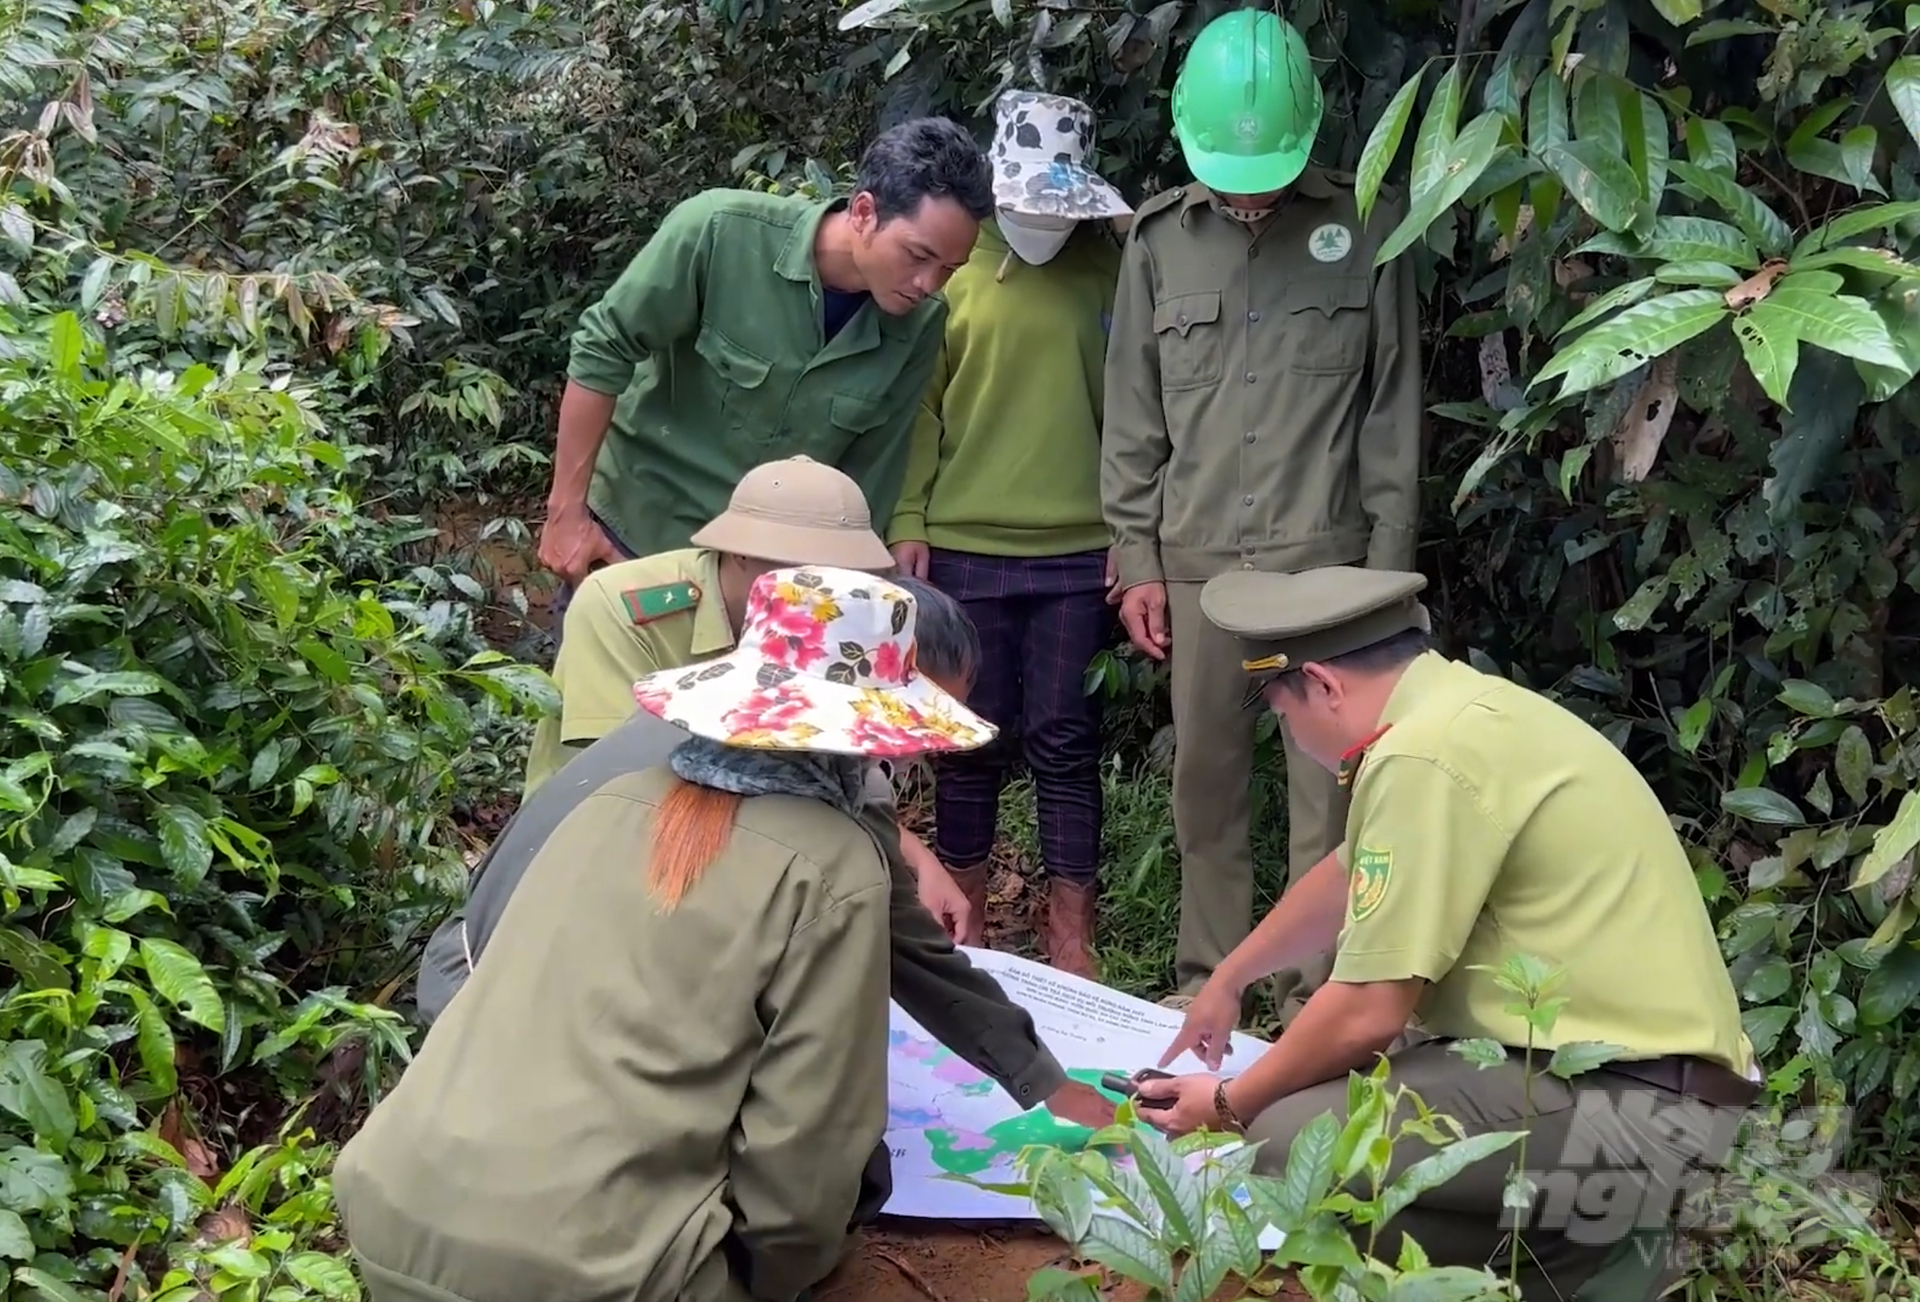 People living near the forest and rangers coordinate to patrol and protect the forest. Photo: Hong Thuy.